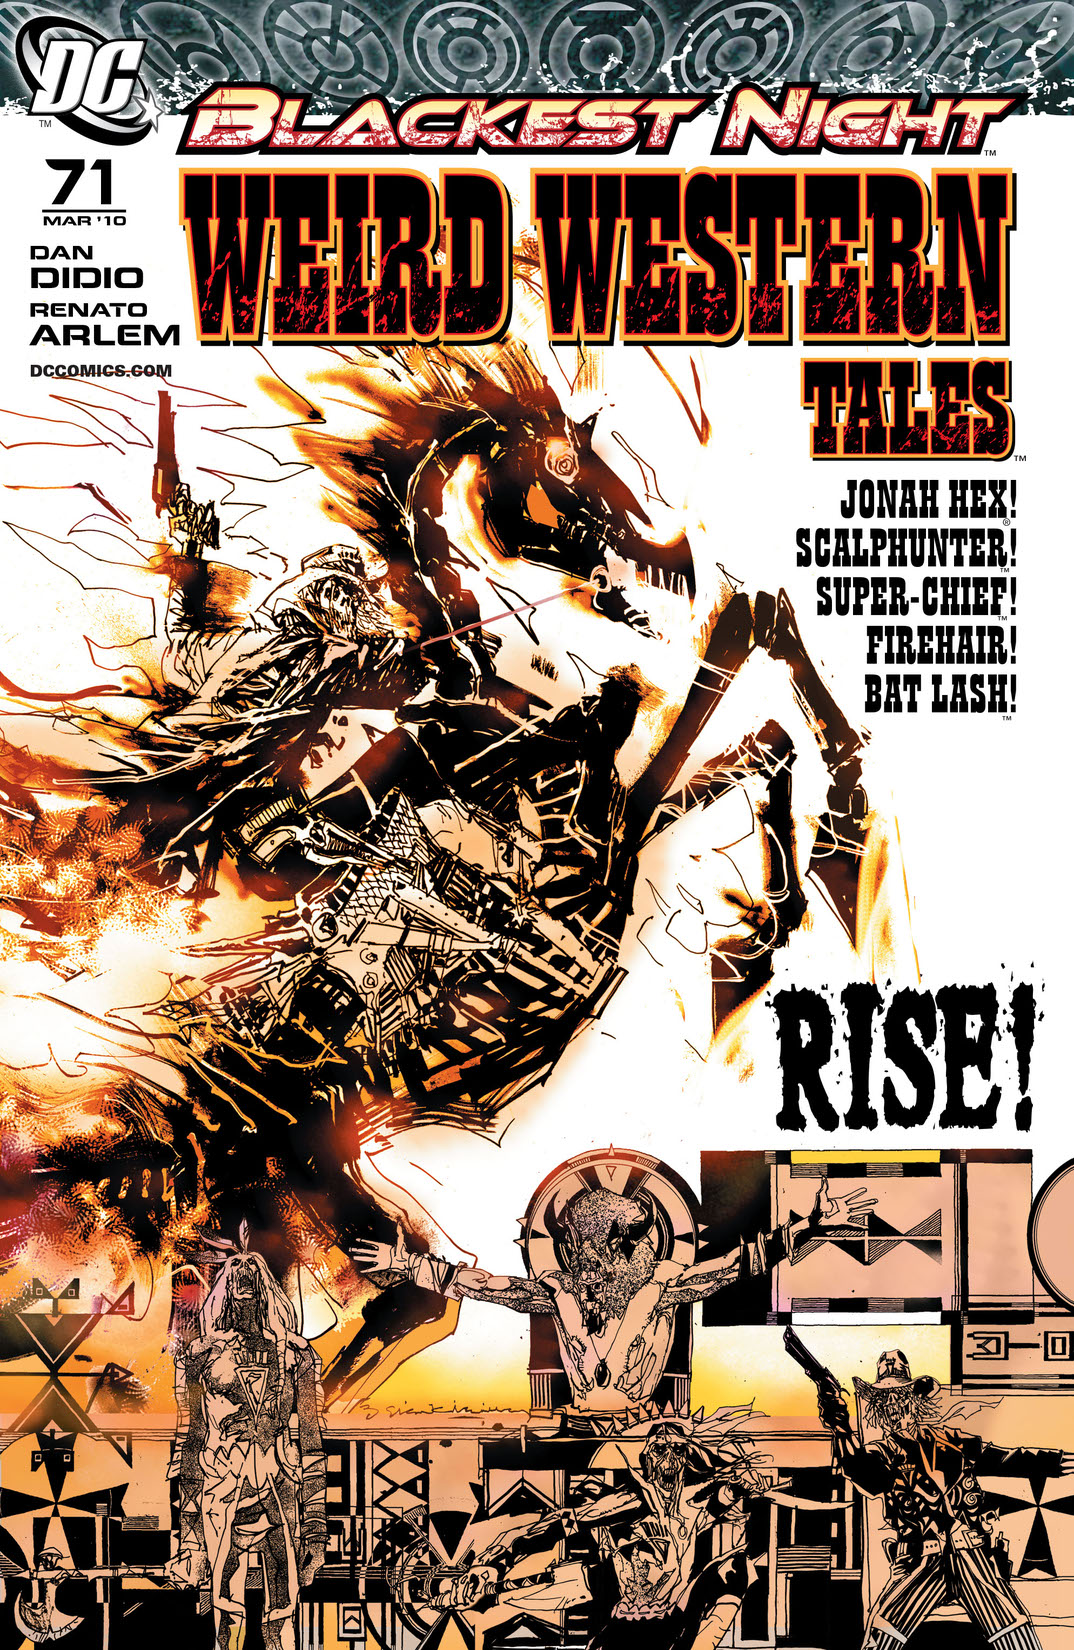 Weird Western Tales #71 preview images